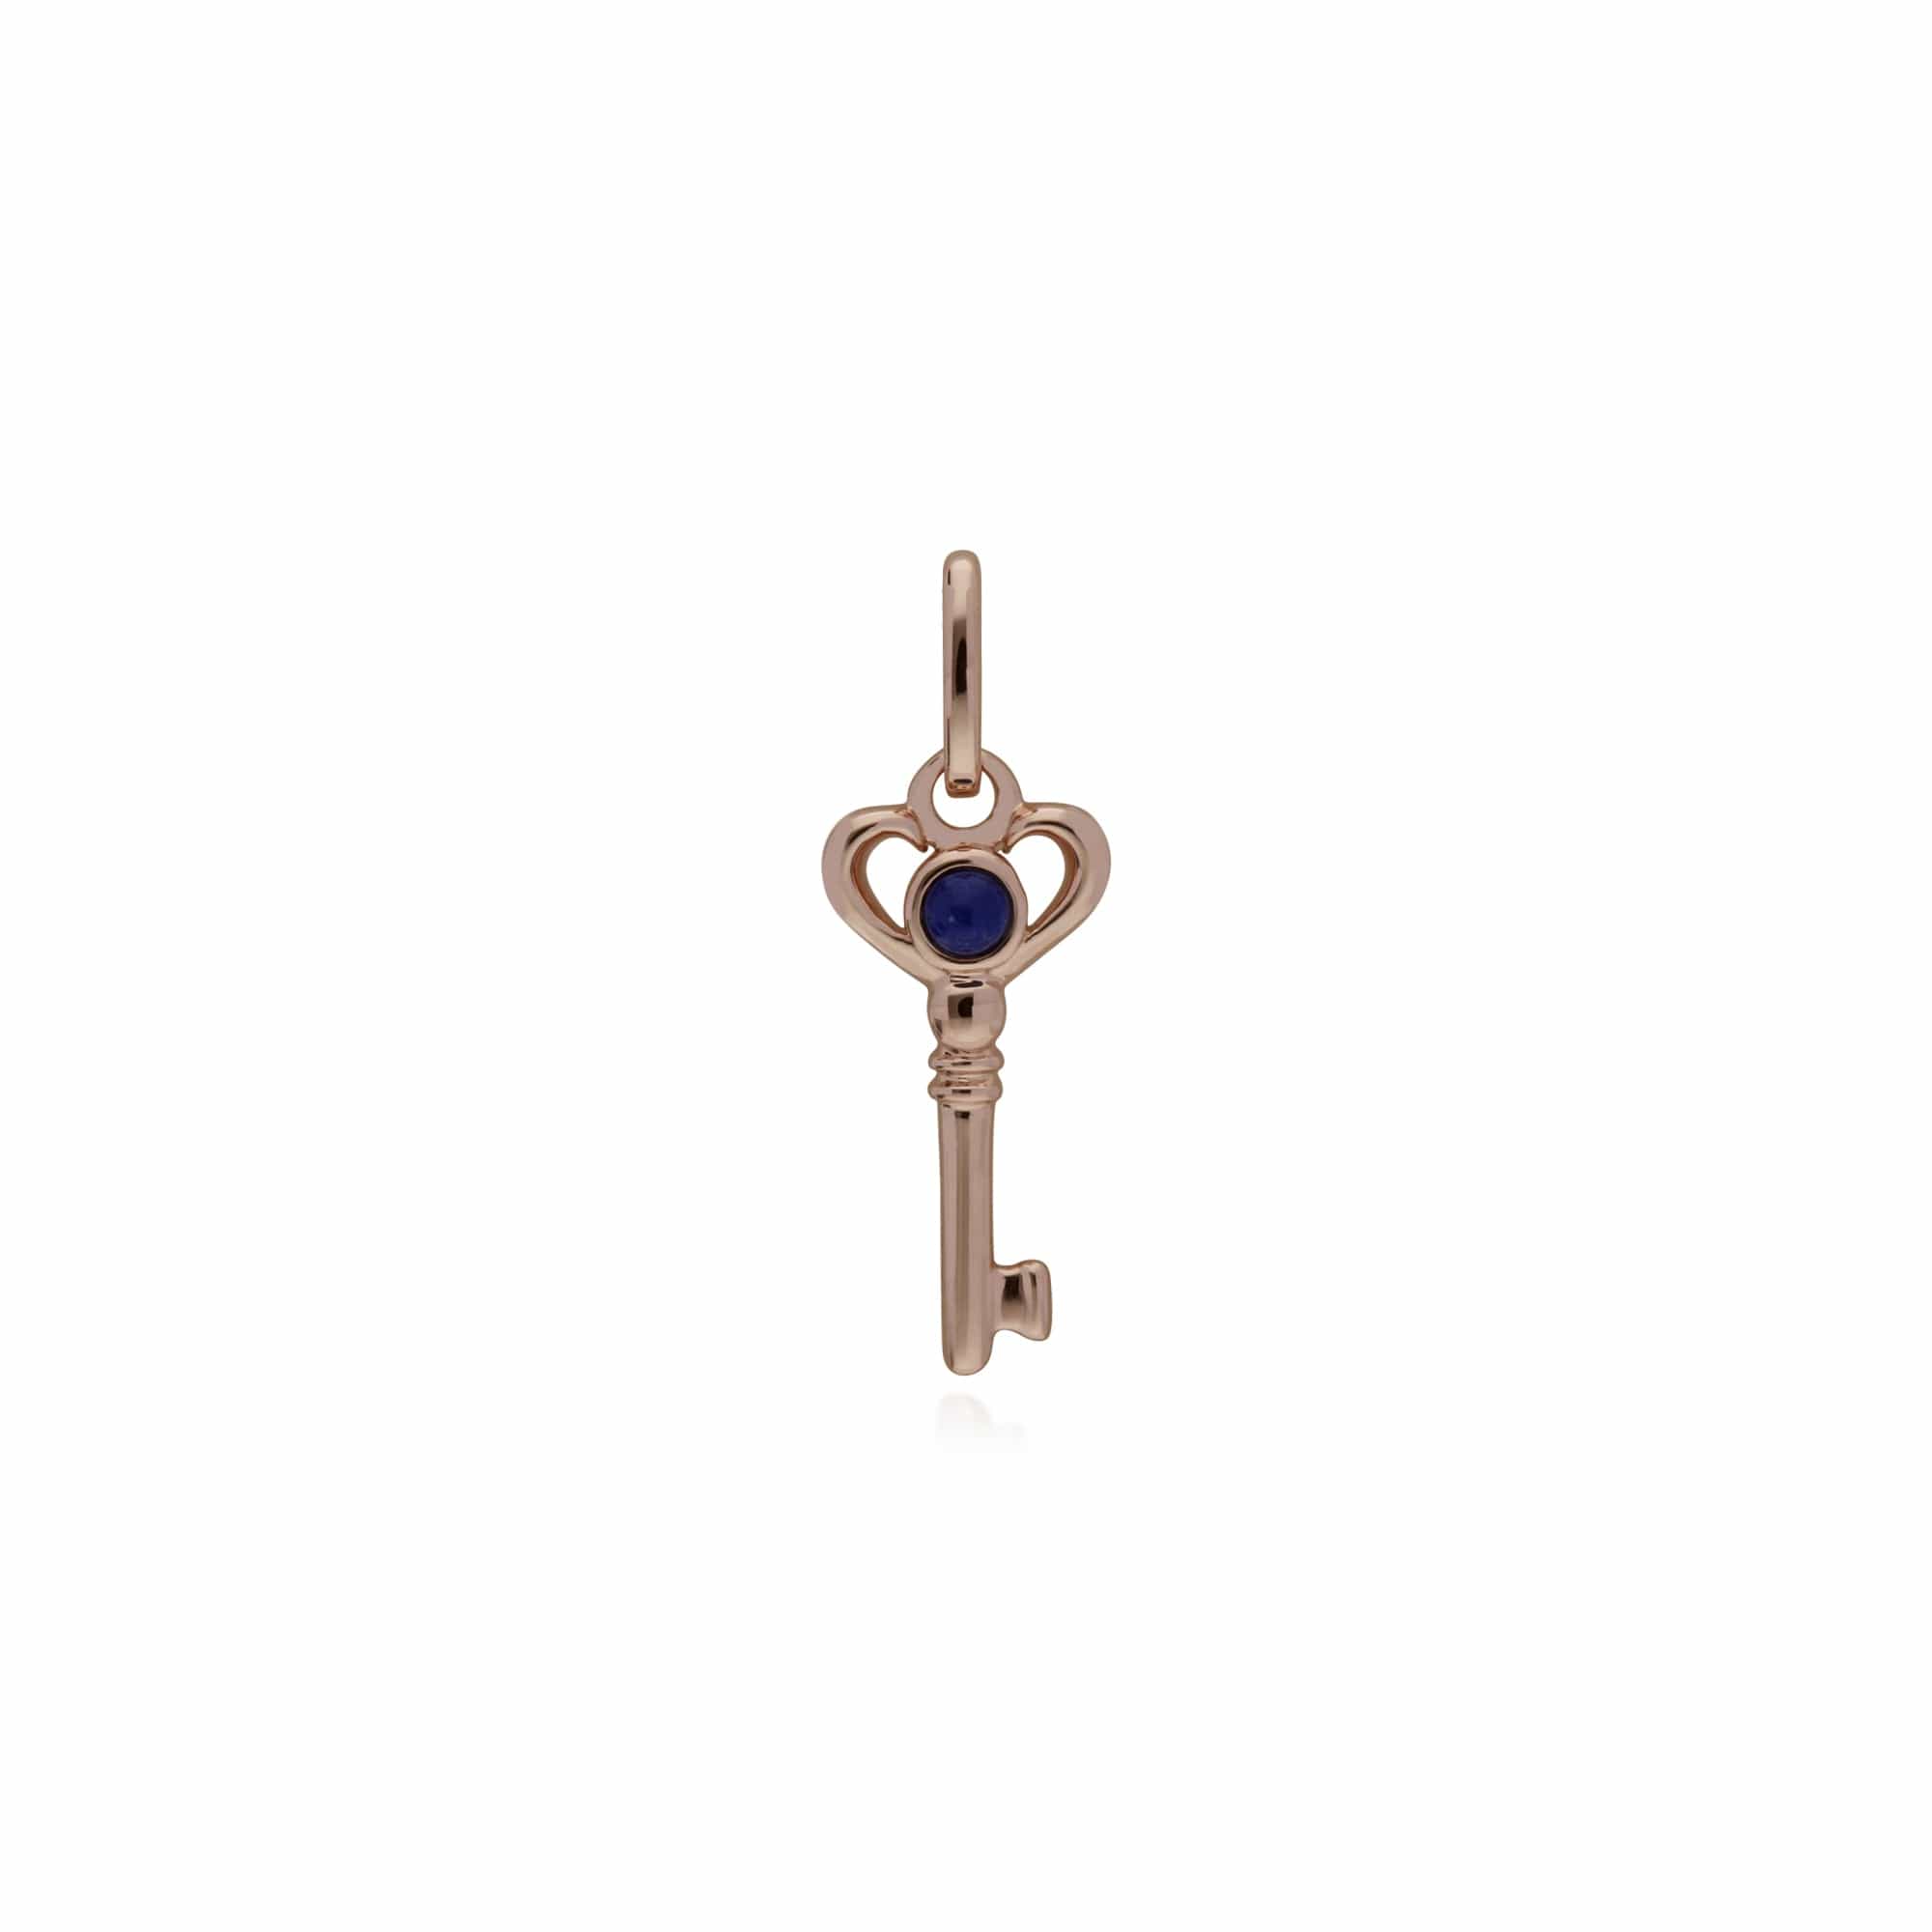 270P027401925-270P026901925 Classic Heart Lock Pendant & Lapis Lazuli Key Charm in Rose Gold Plated 925 Sterling Silver 2